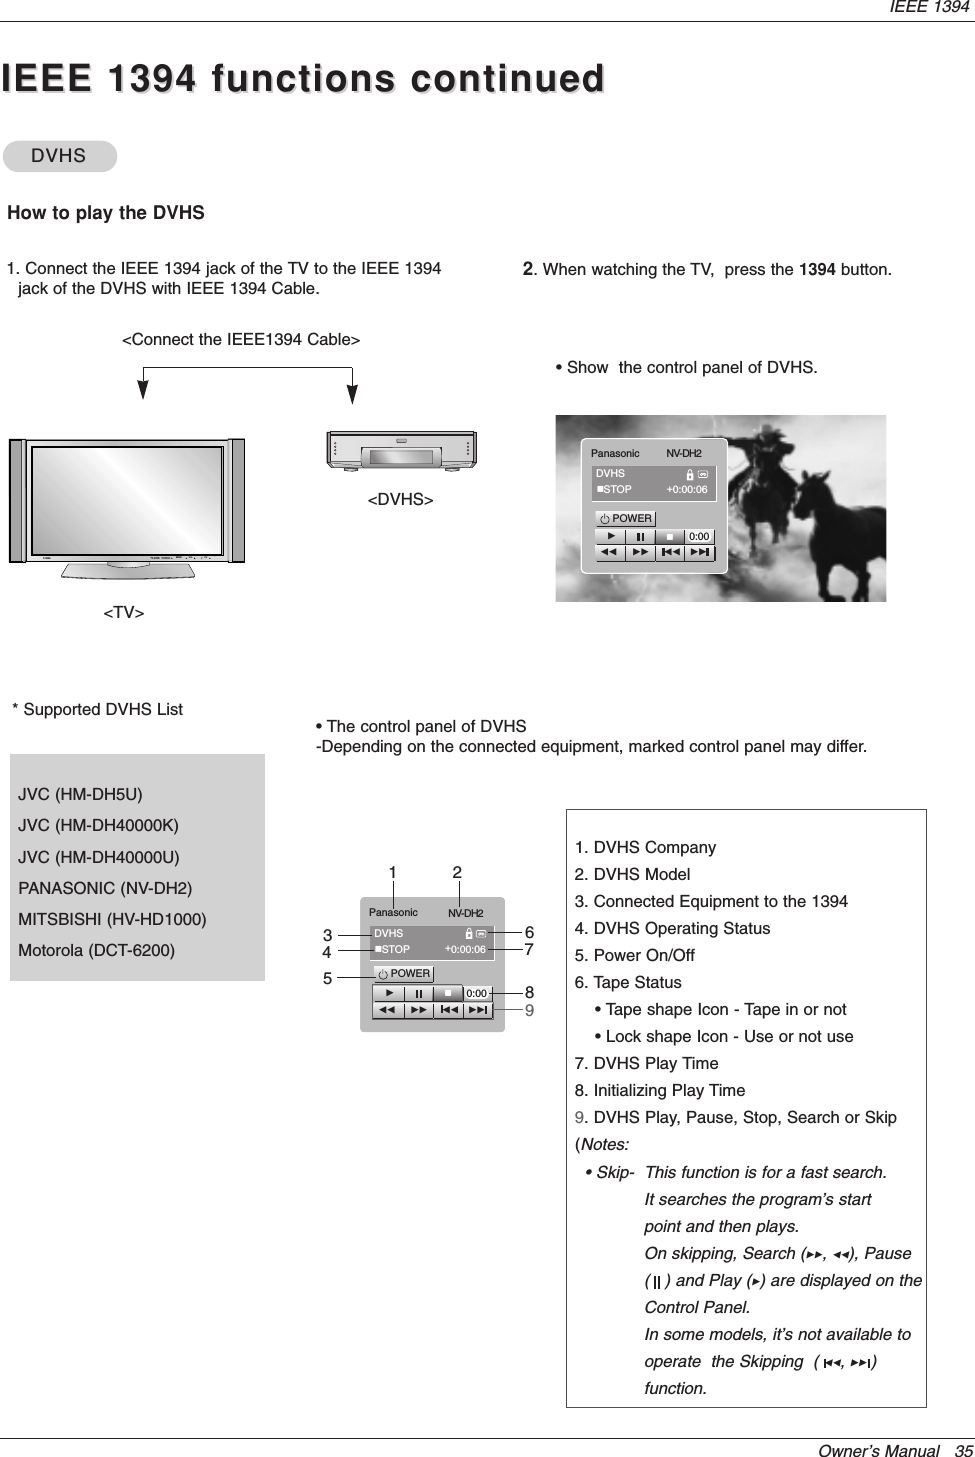 Owner’s Manual   35IEEE 1394IEEE 1394 functions continuedIEEE 1394 functions continuedDVHS DVHS VHow to play the DVHSTV/VIDEOMENUVOL CH POWER      TV GUIDE&lt;TV&gt;&lt;DVHS&gt;1. Connect the IEEE 1394 jack of the TV to the IEEE 1394jack of the DVHS with IEEE 1394 Cable. 2. When watching the TV,  press the 1394 button.• Show  the control panel of DVHS.POWERGVGGFF FF GGPanasonic NV-DH2DVHSVSTOP +0:00:06* Supported DVHS ListJVC (HM-DH5U)JVC (HM-DH40000K) JVC (HM-DH40000U)   PANASONIC (NV-DH2) MITSBISHI (HV-HD1000)Motorola (DCT-6200)• The control panel of DVHS-Depending on the connected equipment, marked control panel may differ.0:00POWERGVGGFF FF GGPanasonic NV-DH2DVHSVSTOP +0:00:061 267893450:001. DVHS Company2. DVHS Model3. Connected Equipment to the 13944. DVHS Operating Status5. Power On/Off6. Tape Status• Tape shape Icon - Tape in or not • Lock shape Icon - Use or not use7. DVHS Play Time8. Initializing Play Time9. DVHS Play, Pause, Stop, Search or Skip(Notes: • Skip-  This function is for a fast search.It searches the program’s start point and then plays.On skipping, Search (GG, FF), Pause (   ) and Play (G) are displayed on theControl Panel.In some models, it’s not available to operate  the Skipping  ( FF, GG )function.&lt;Connect the IEEE1394 Cable&gt;